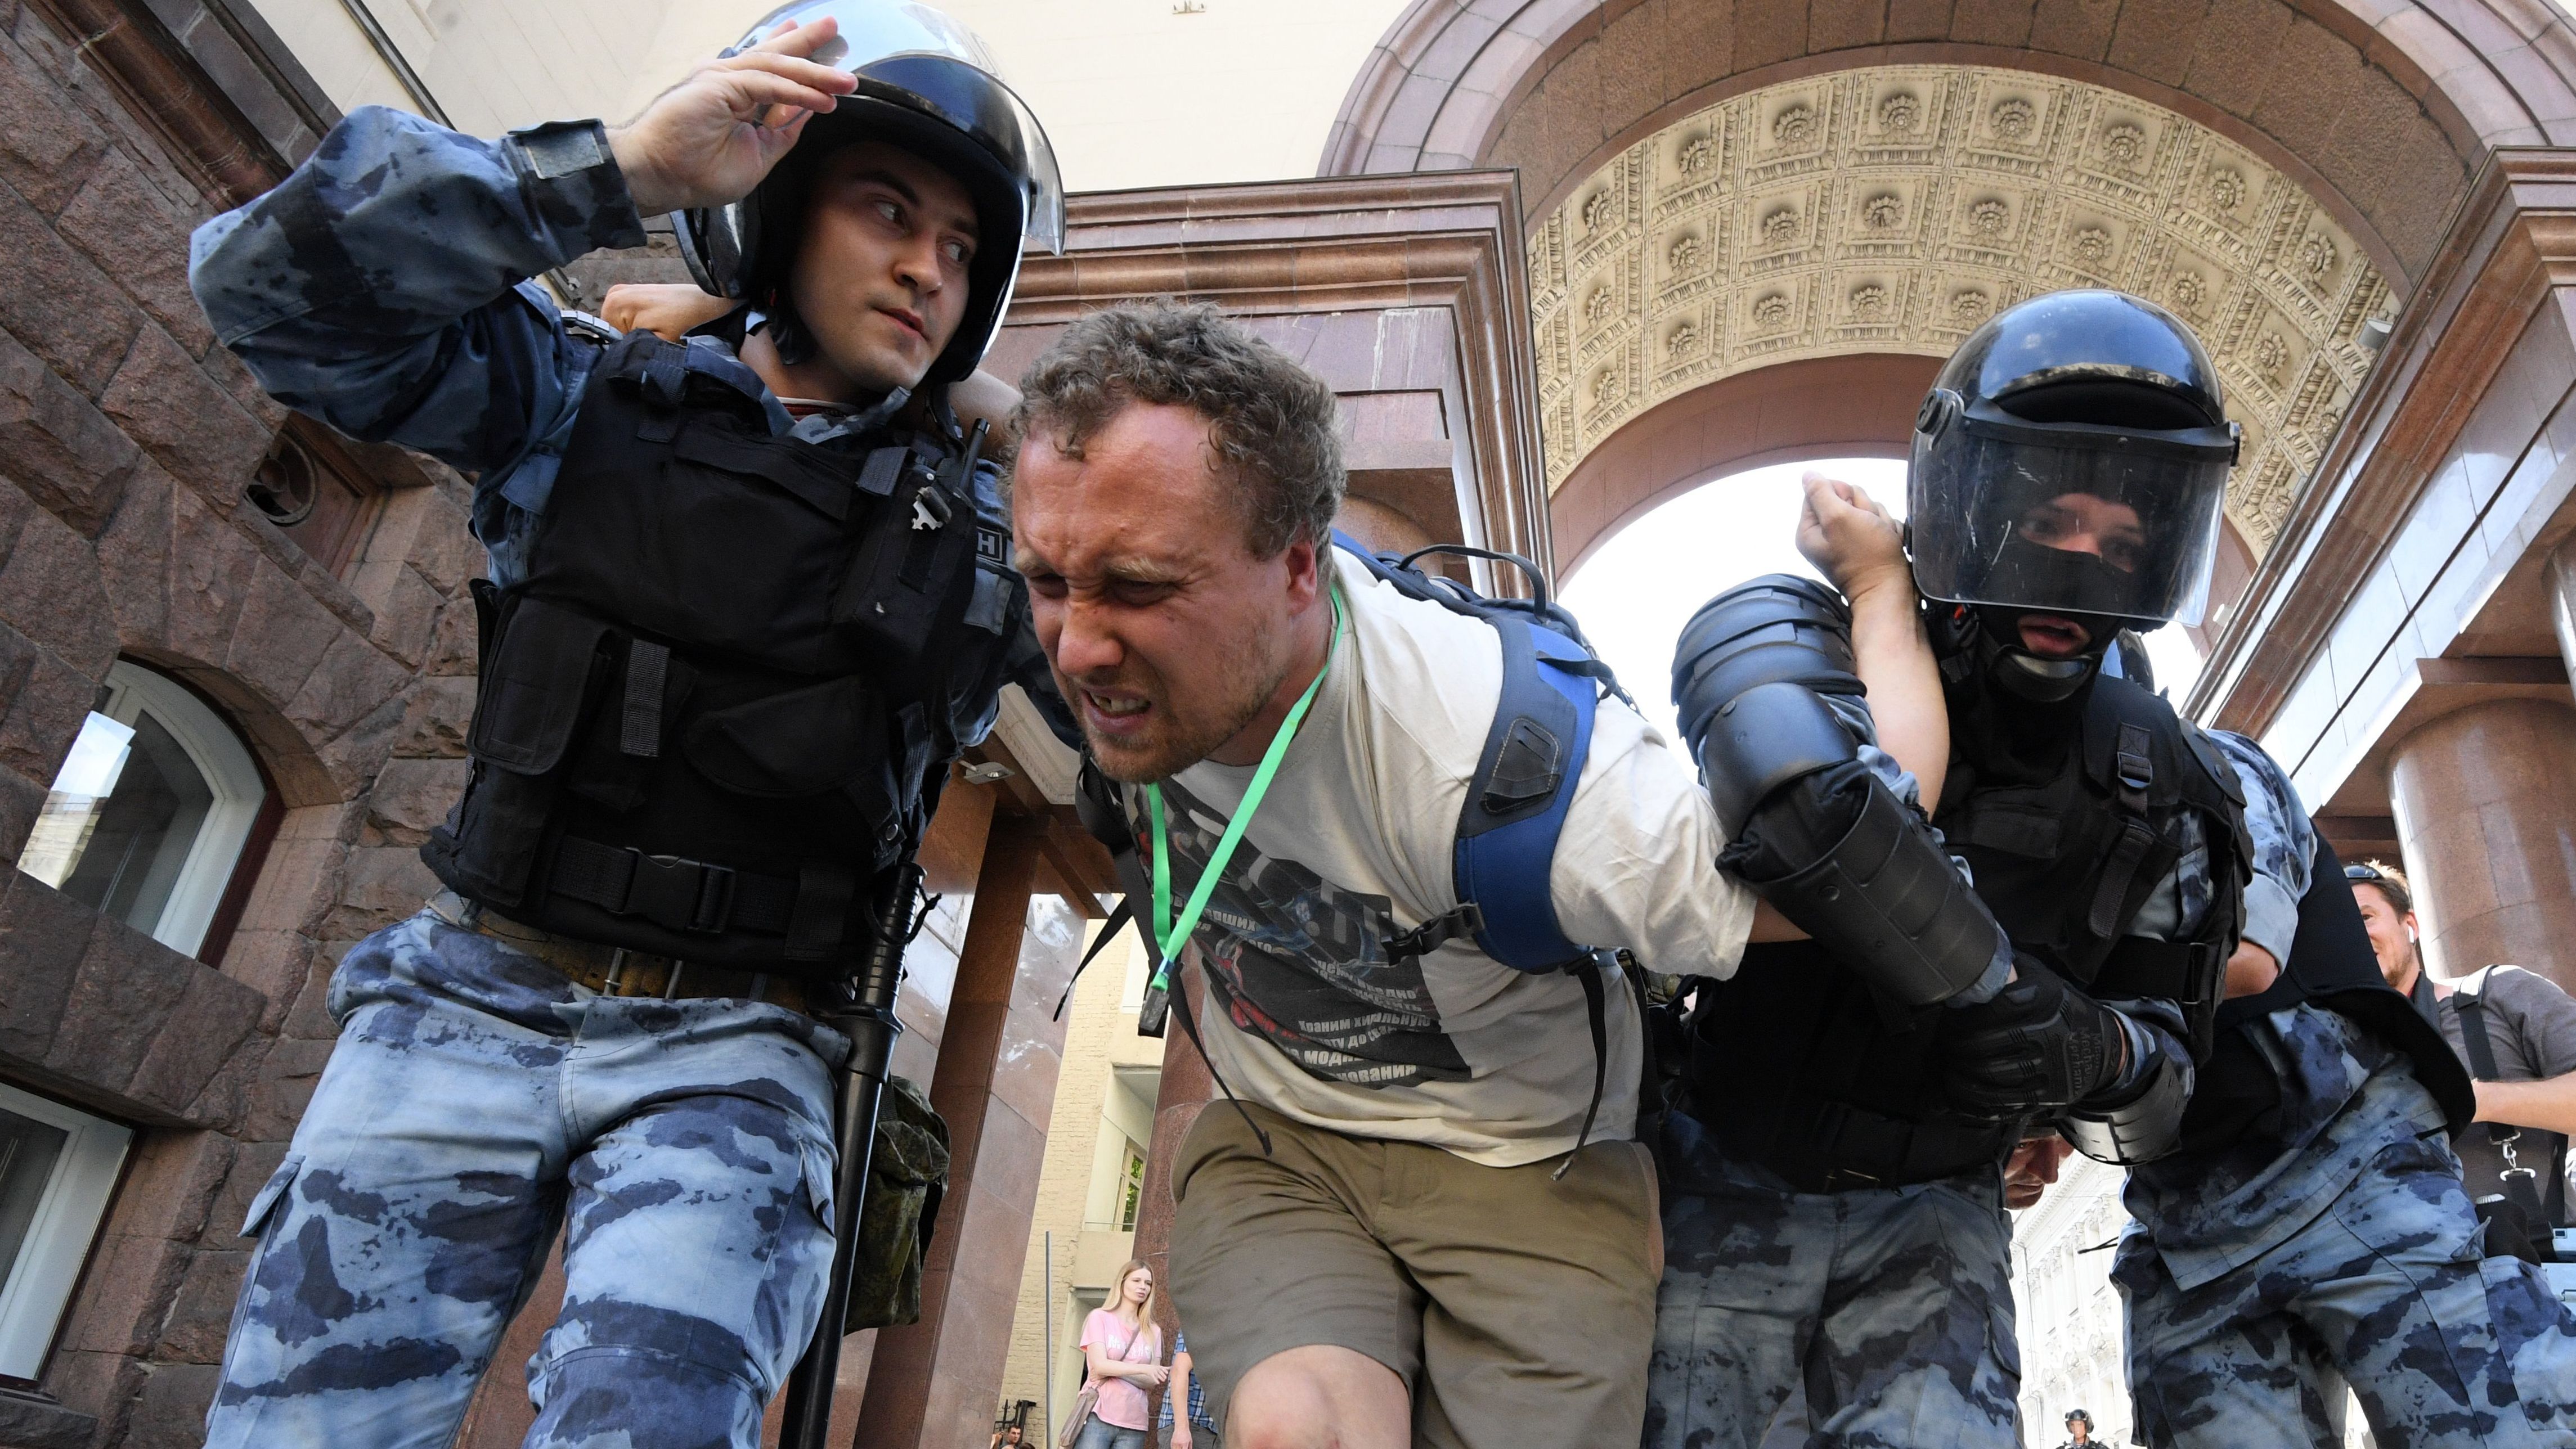 Members of the Russian National Guard detain a protester during an unauthorised rally in downtown Moscow on July 27, 2019.